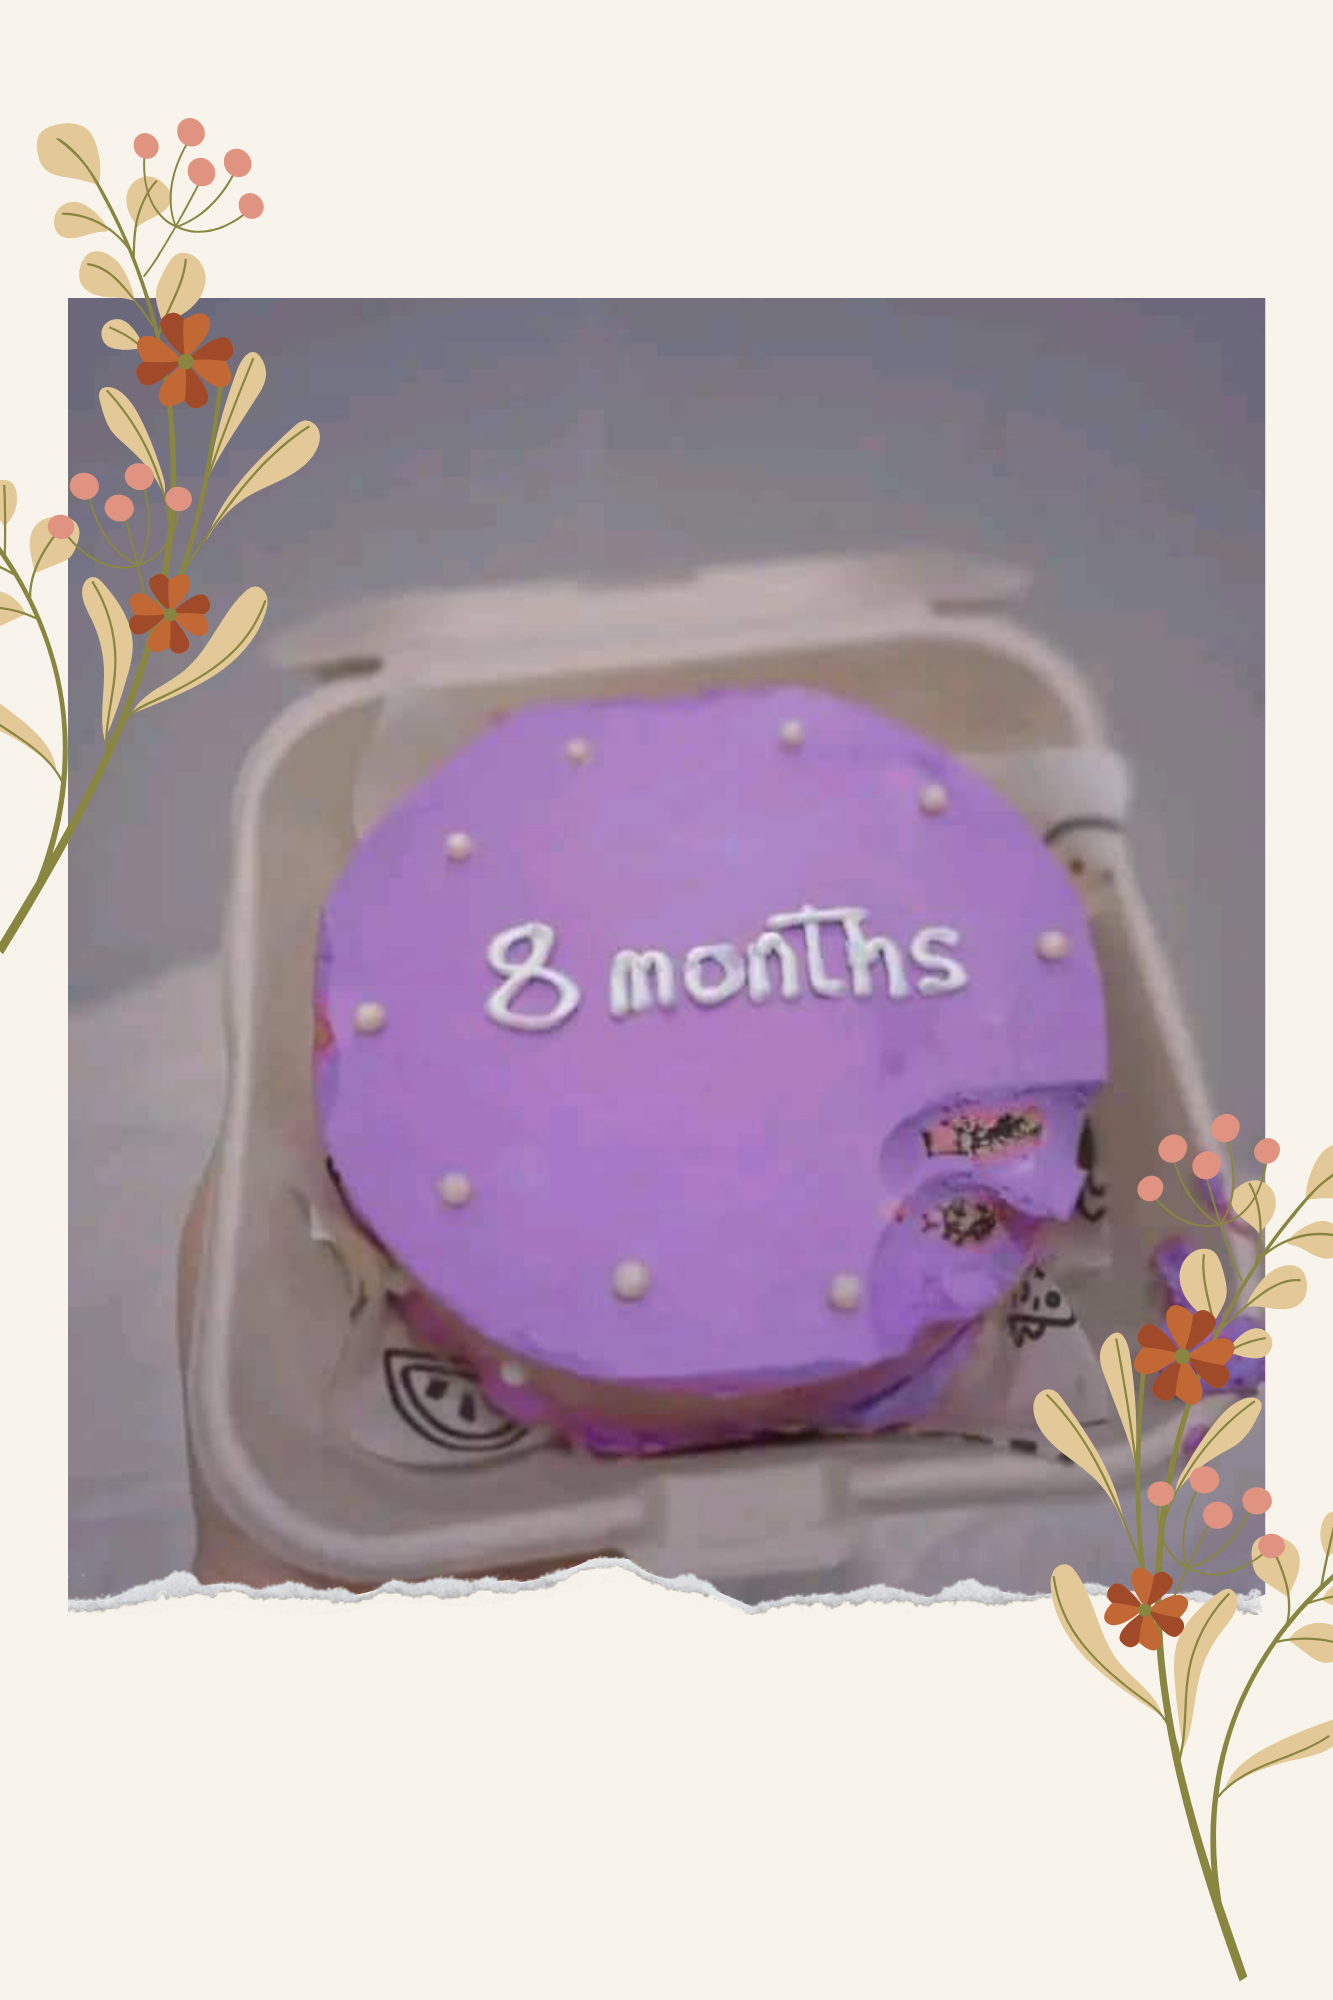 8 months birthday cake for a cute lil... - Papercraft studio | Facebook